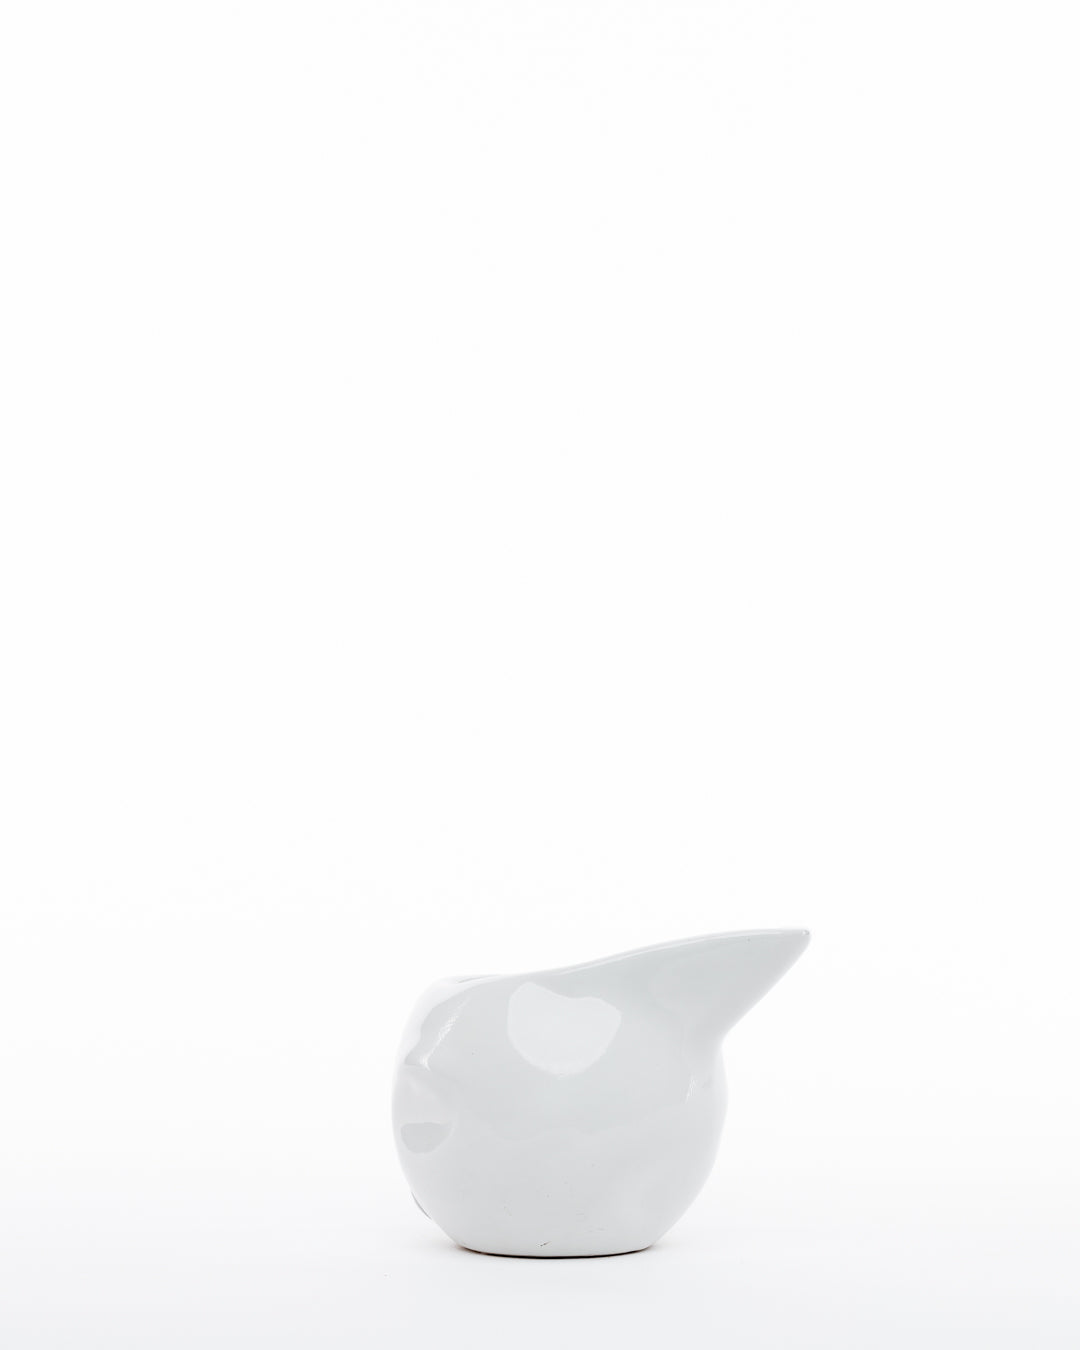 A minimalistic white ceramic pitcher, crafted using traditional techniques, features a smooth, rounded body and a small spout. The design is modern and simplistic, set against a plain white background. The Gravy Boat 374 by Montes Doggett is positioned slightly off-center and is the only object in the image.